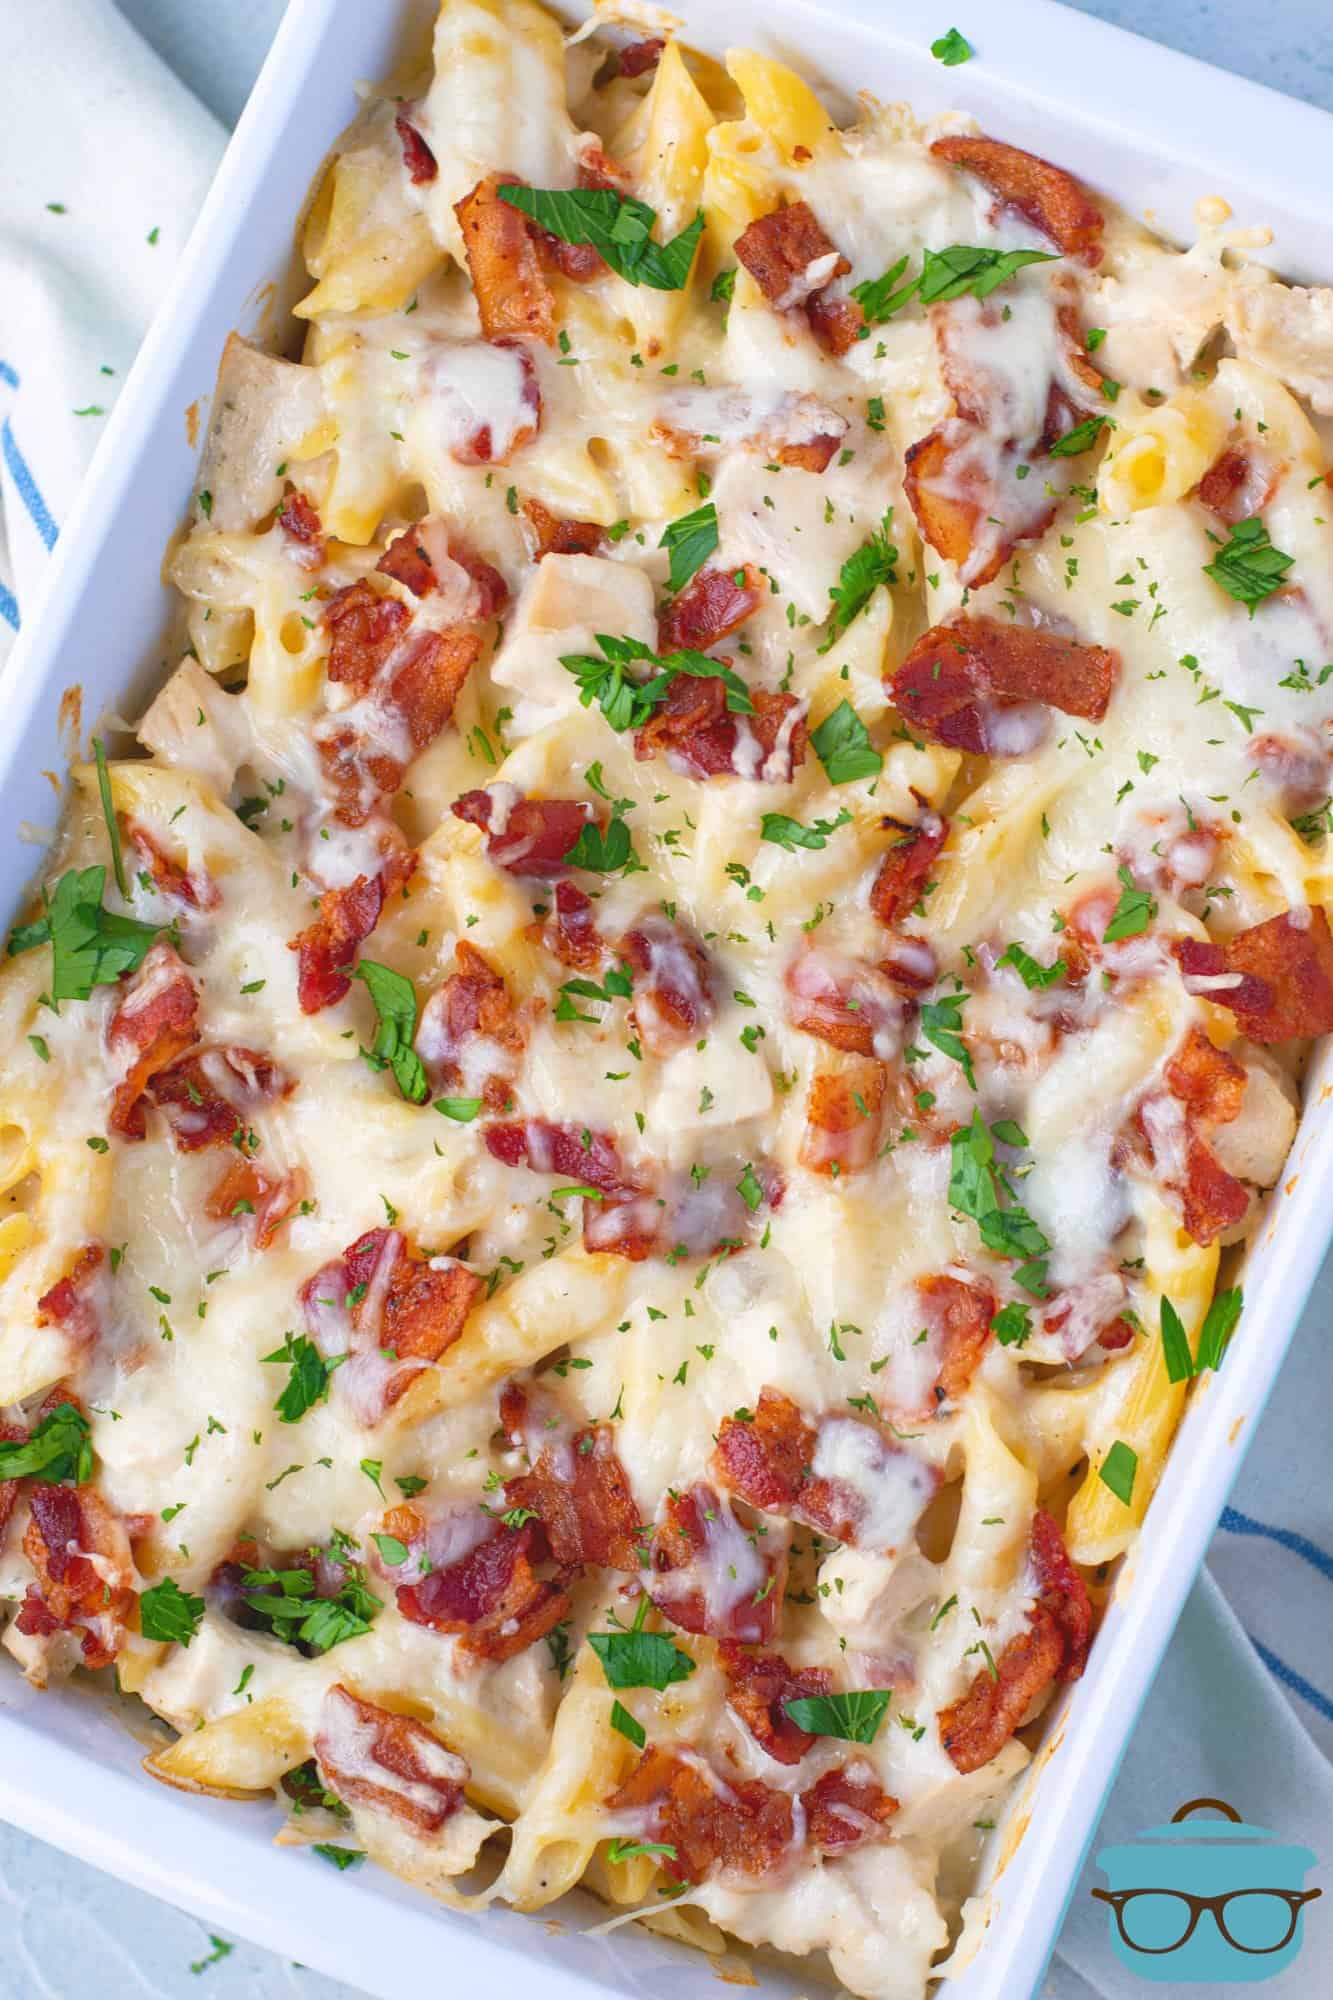 fully baked chicken bacon pasta casserole in a baking dish topped with chopped parsley.